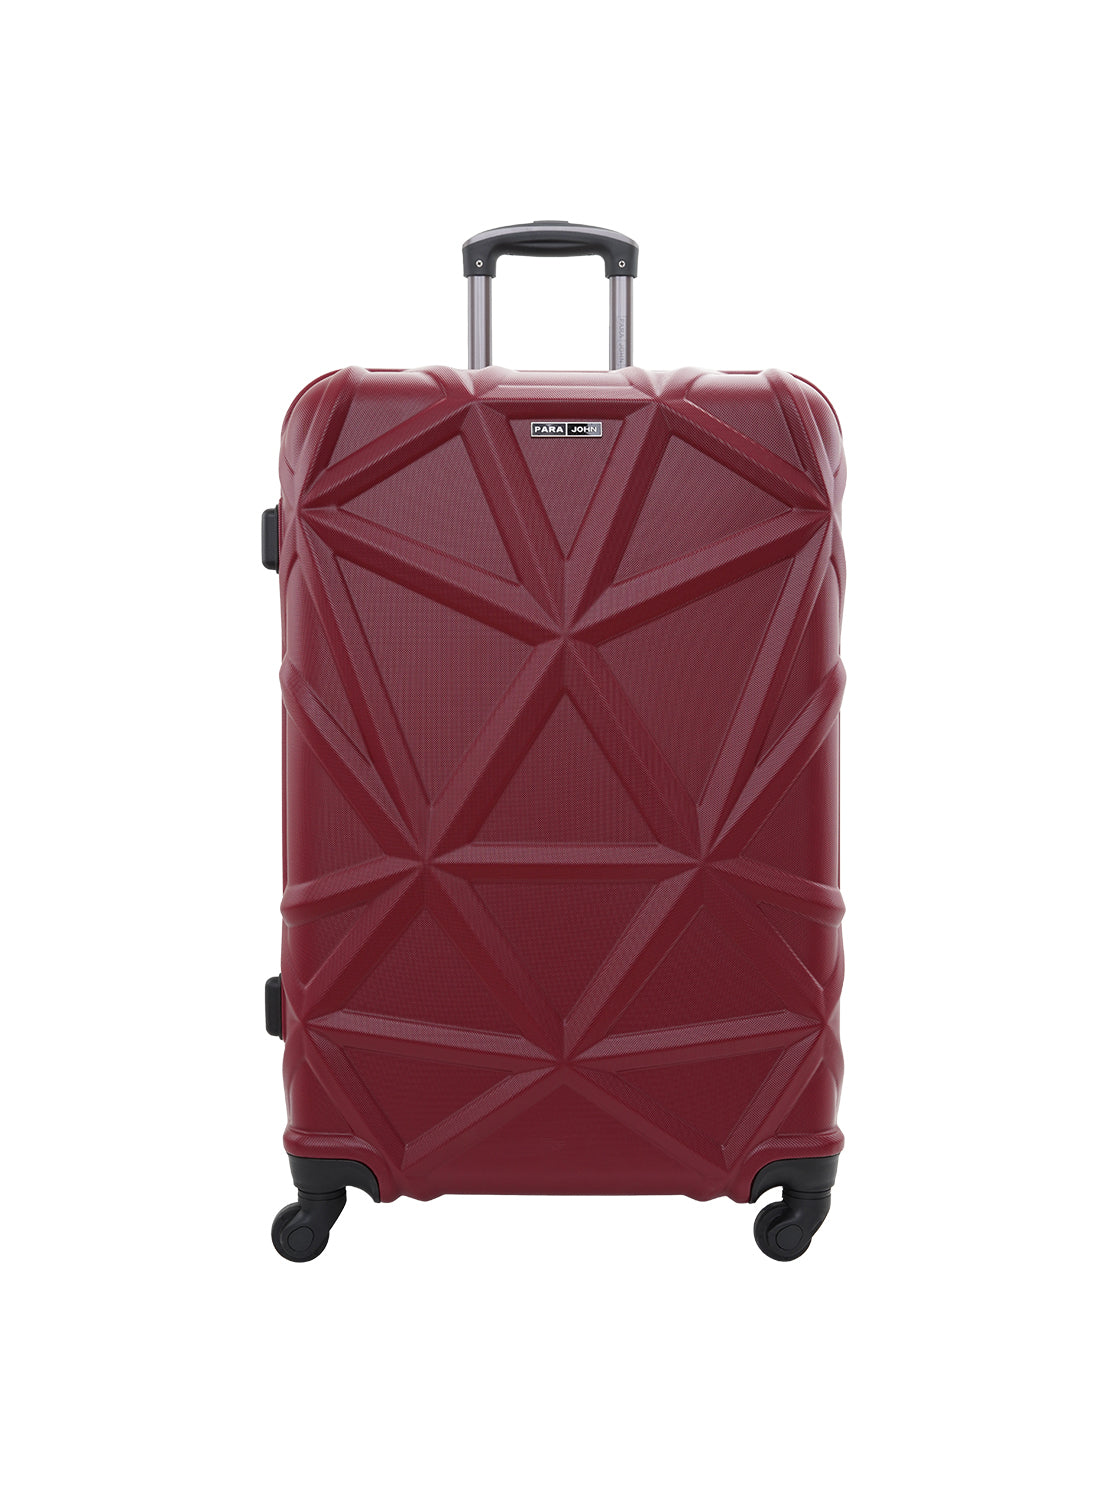 Matrix ABS Hardside Spinner Check In Large Luggage Trolley 27 Inch